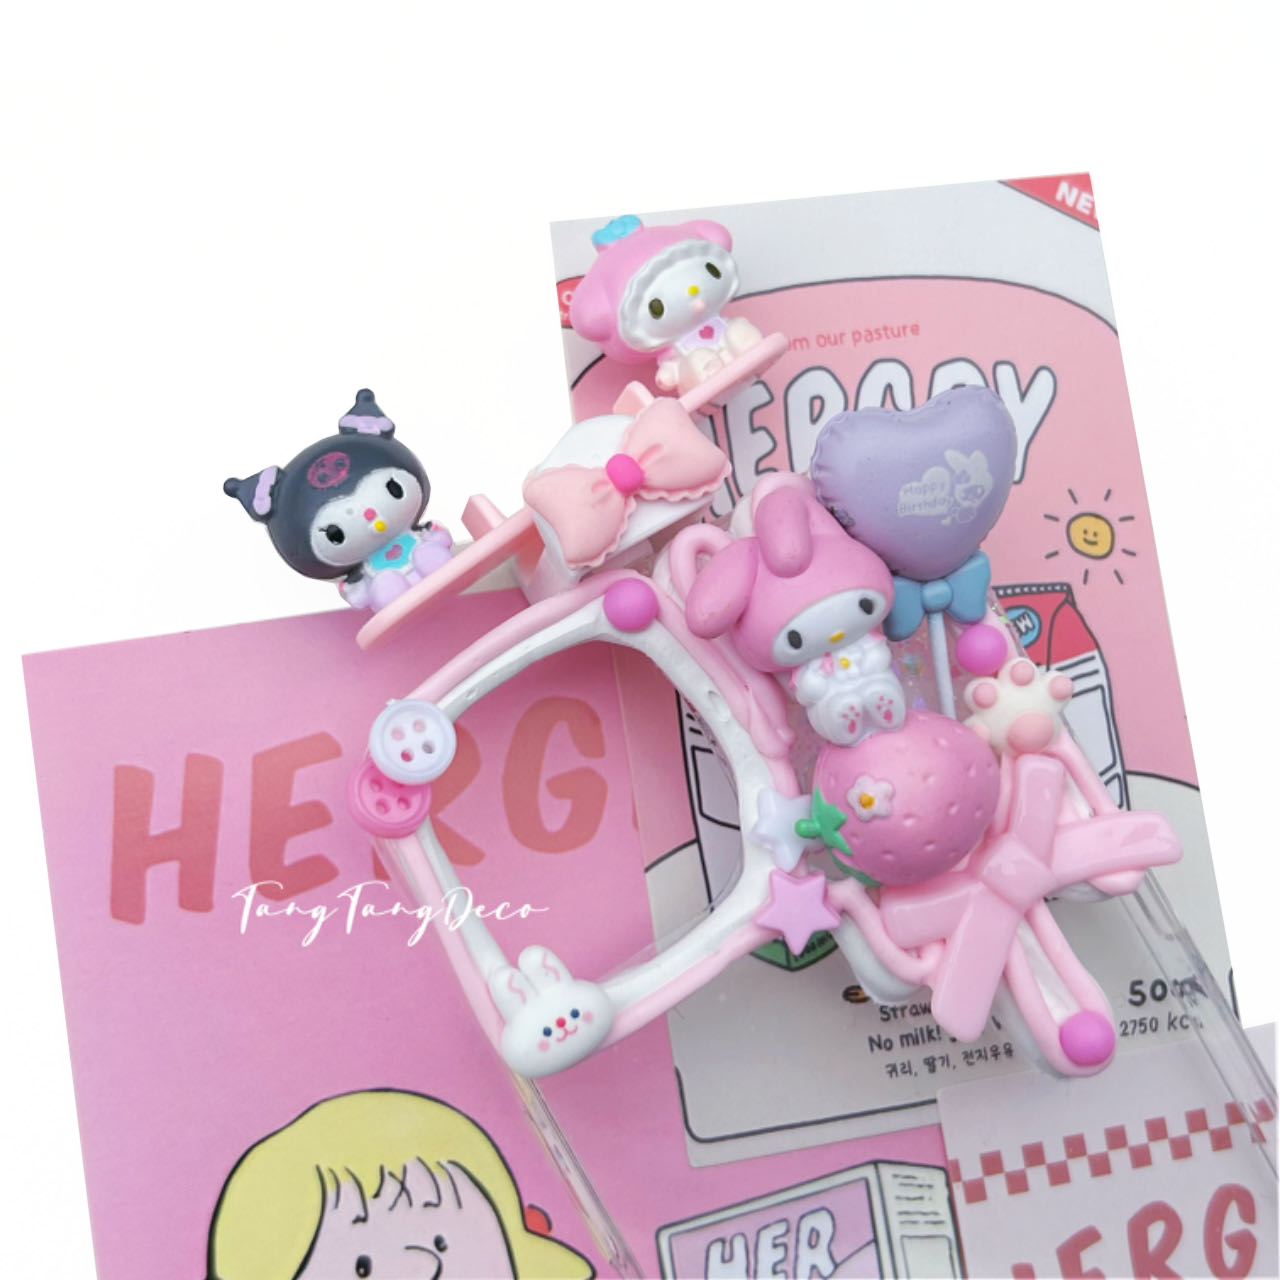 Melody and Kuromi seesaw phone case